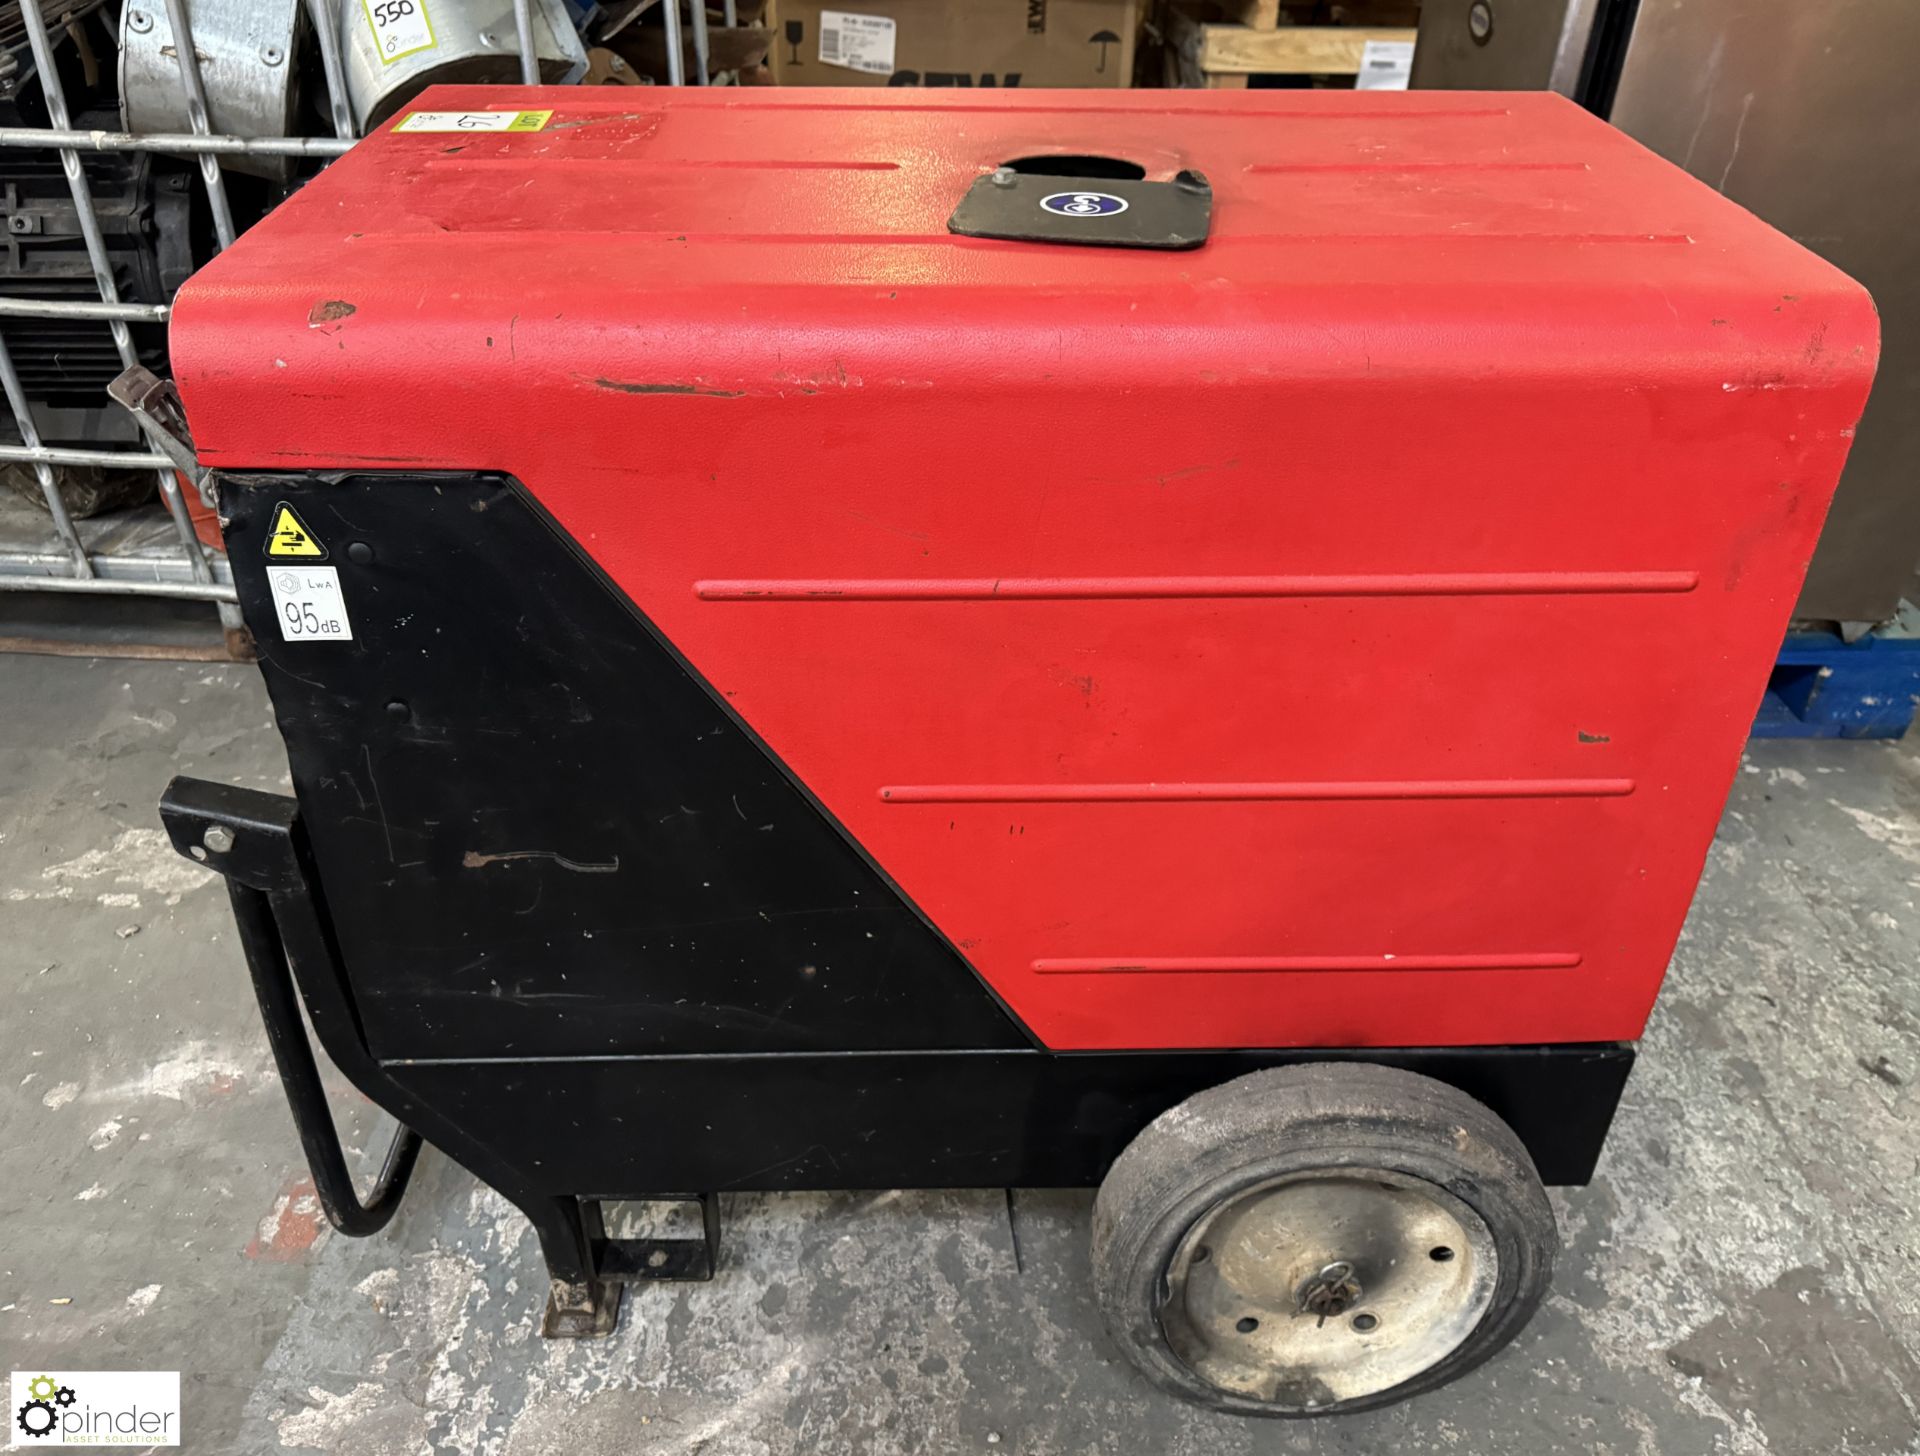 Pramac P6000 S2 single axle diesel driven Generator Set, 4.3kw, 3 x 110volts outlets, 4004hours ( - Image 2 of 9